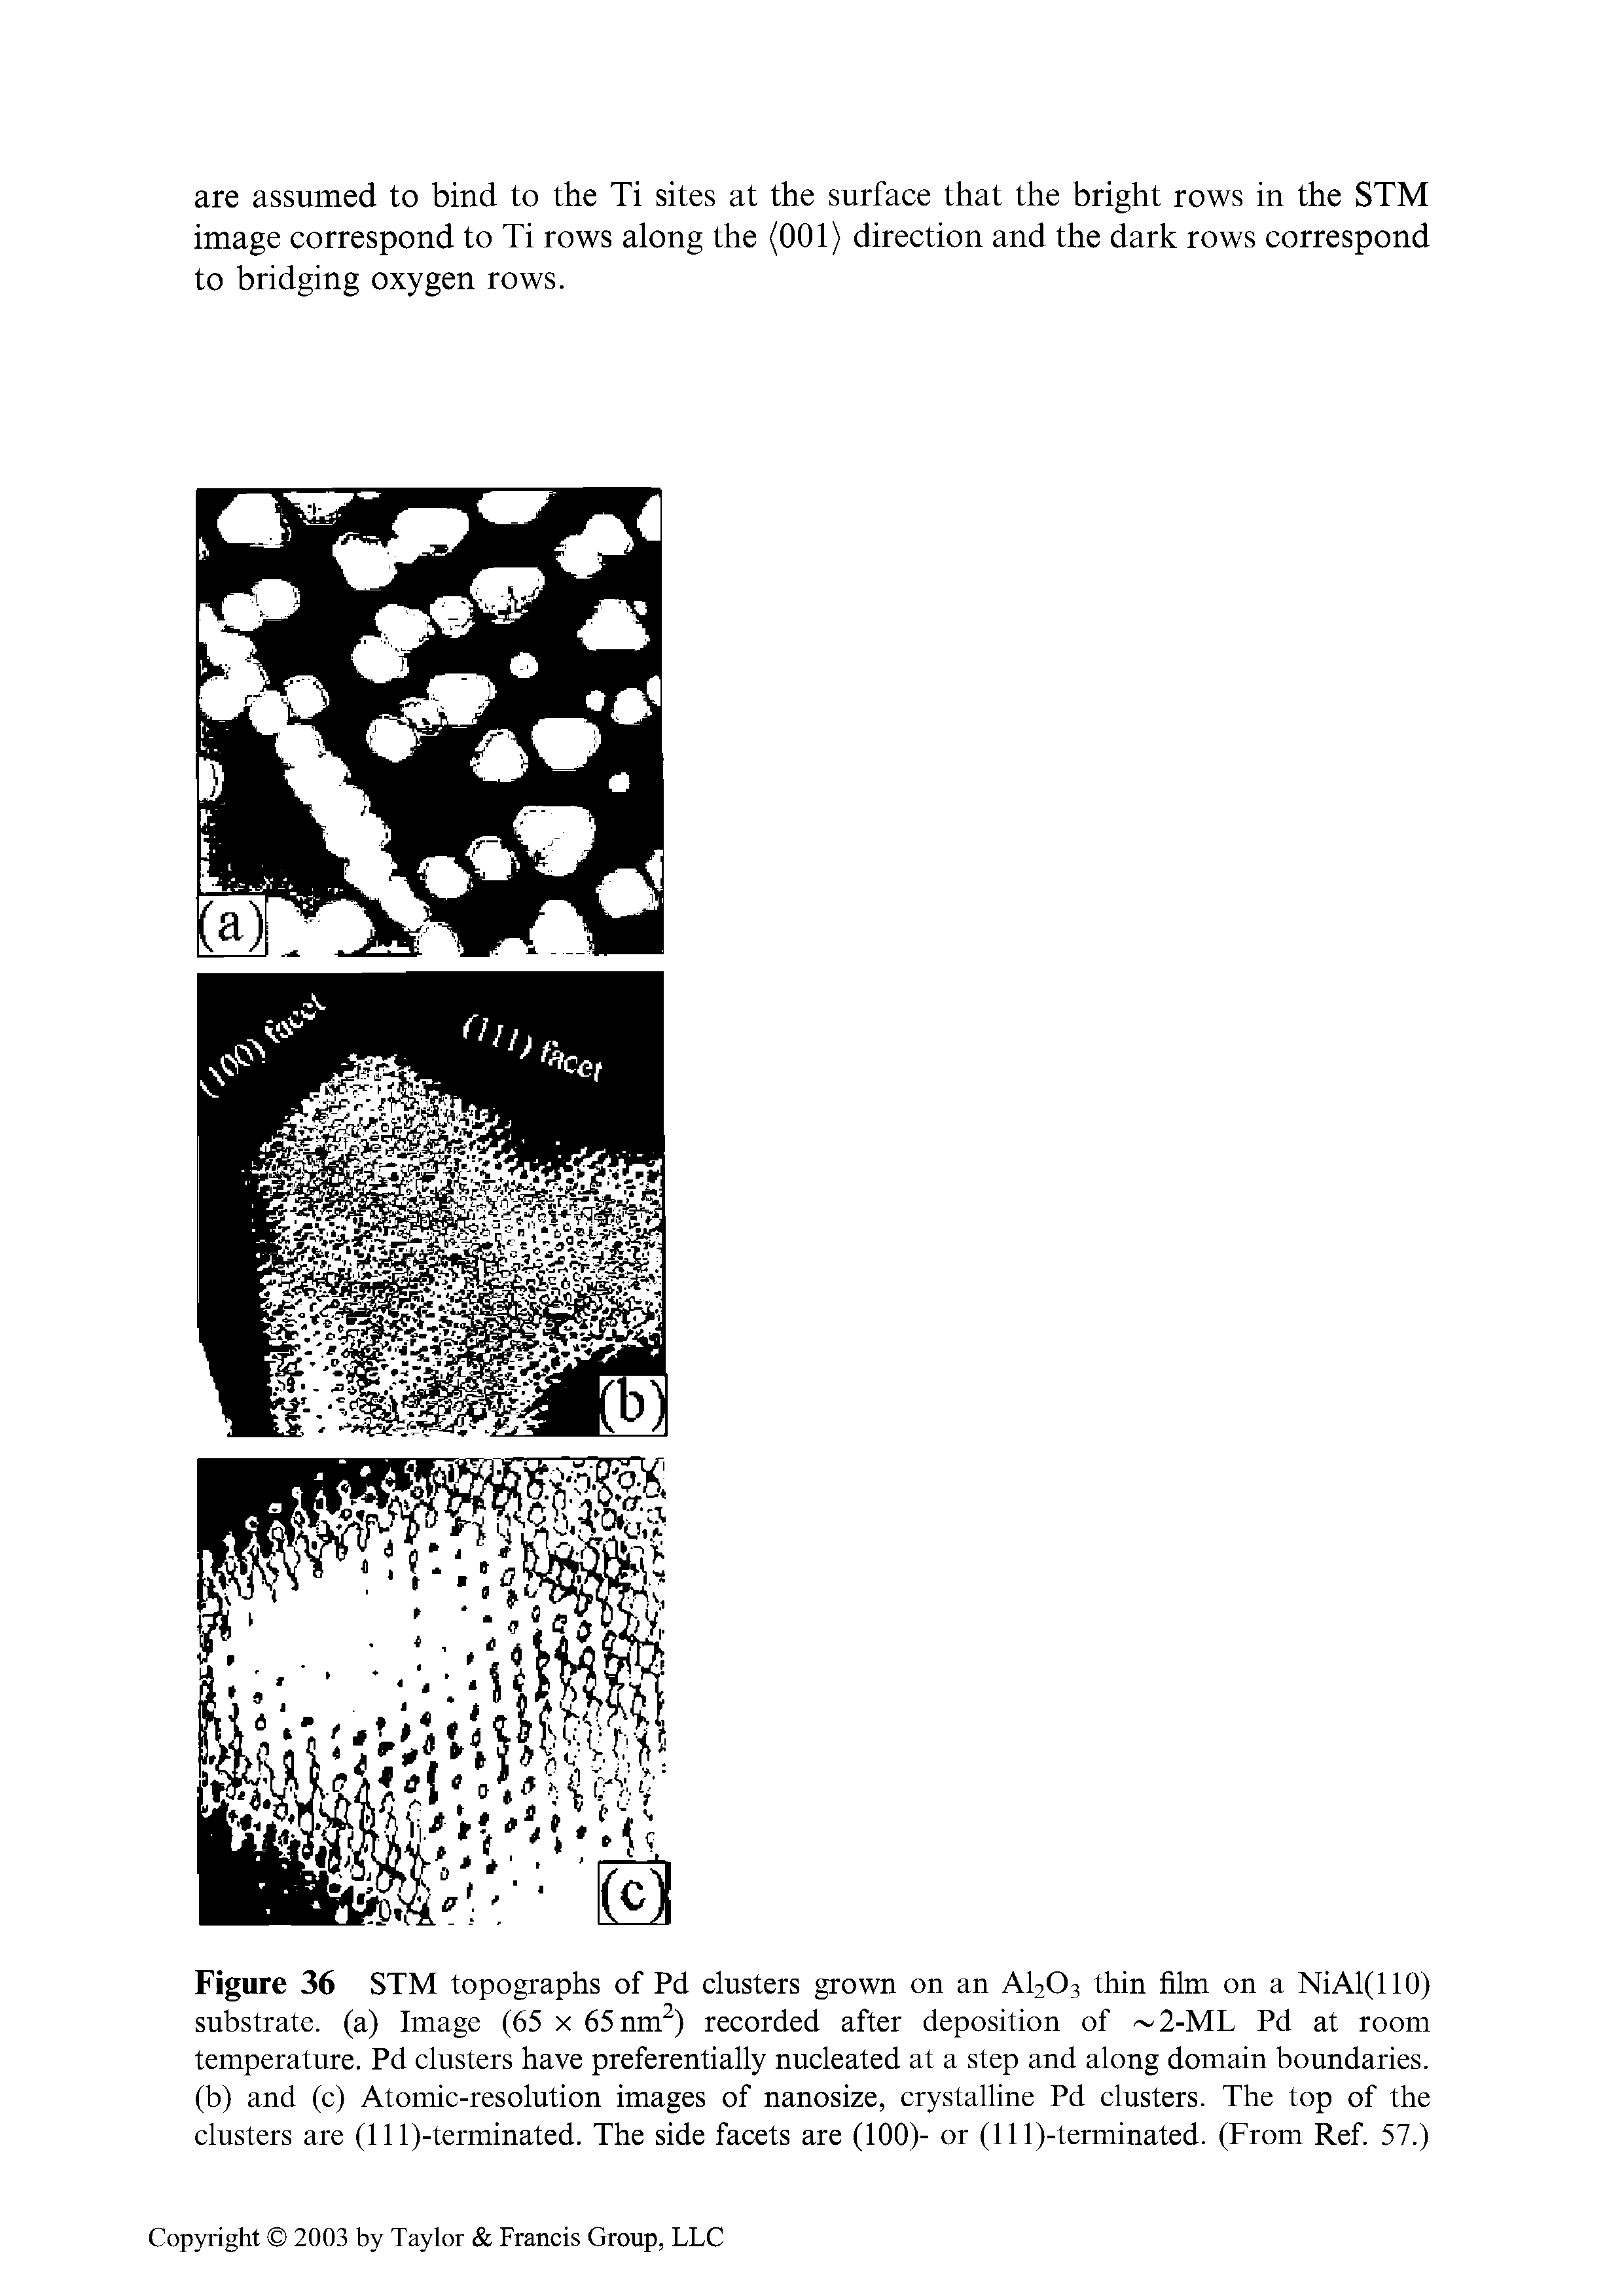 Figure 36 STM topographs of Pd clusters grown on an AI2O3 thin film on a NiAl(llO) substrate, (a) Image (65 x 65 nm ) recorded after deposition of 2-ML Pd at room temperature. Pd clusters have preferentially nucleated at a step and along domain boundaries, (b) and (c) Atomic-resolution images of nanosize, crystalline Pd clusters. The top of the clusters are (11 l)-terminated. The side facets are (100)- or (lll)-terminated. (From Ref. 57.)...